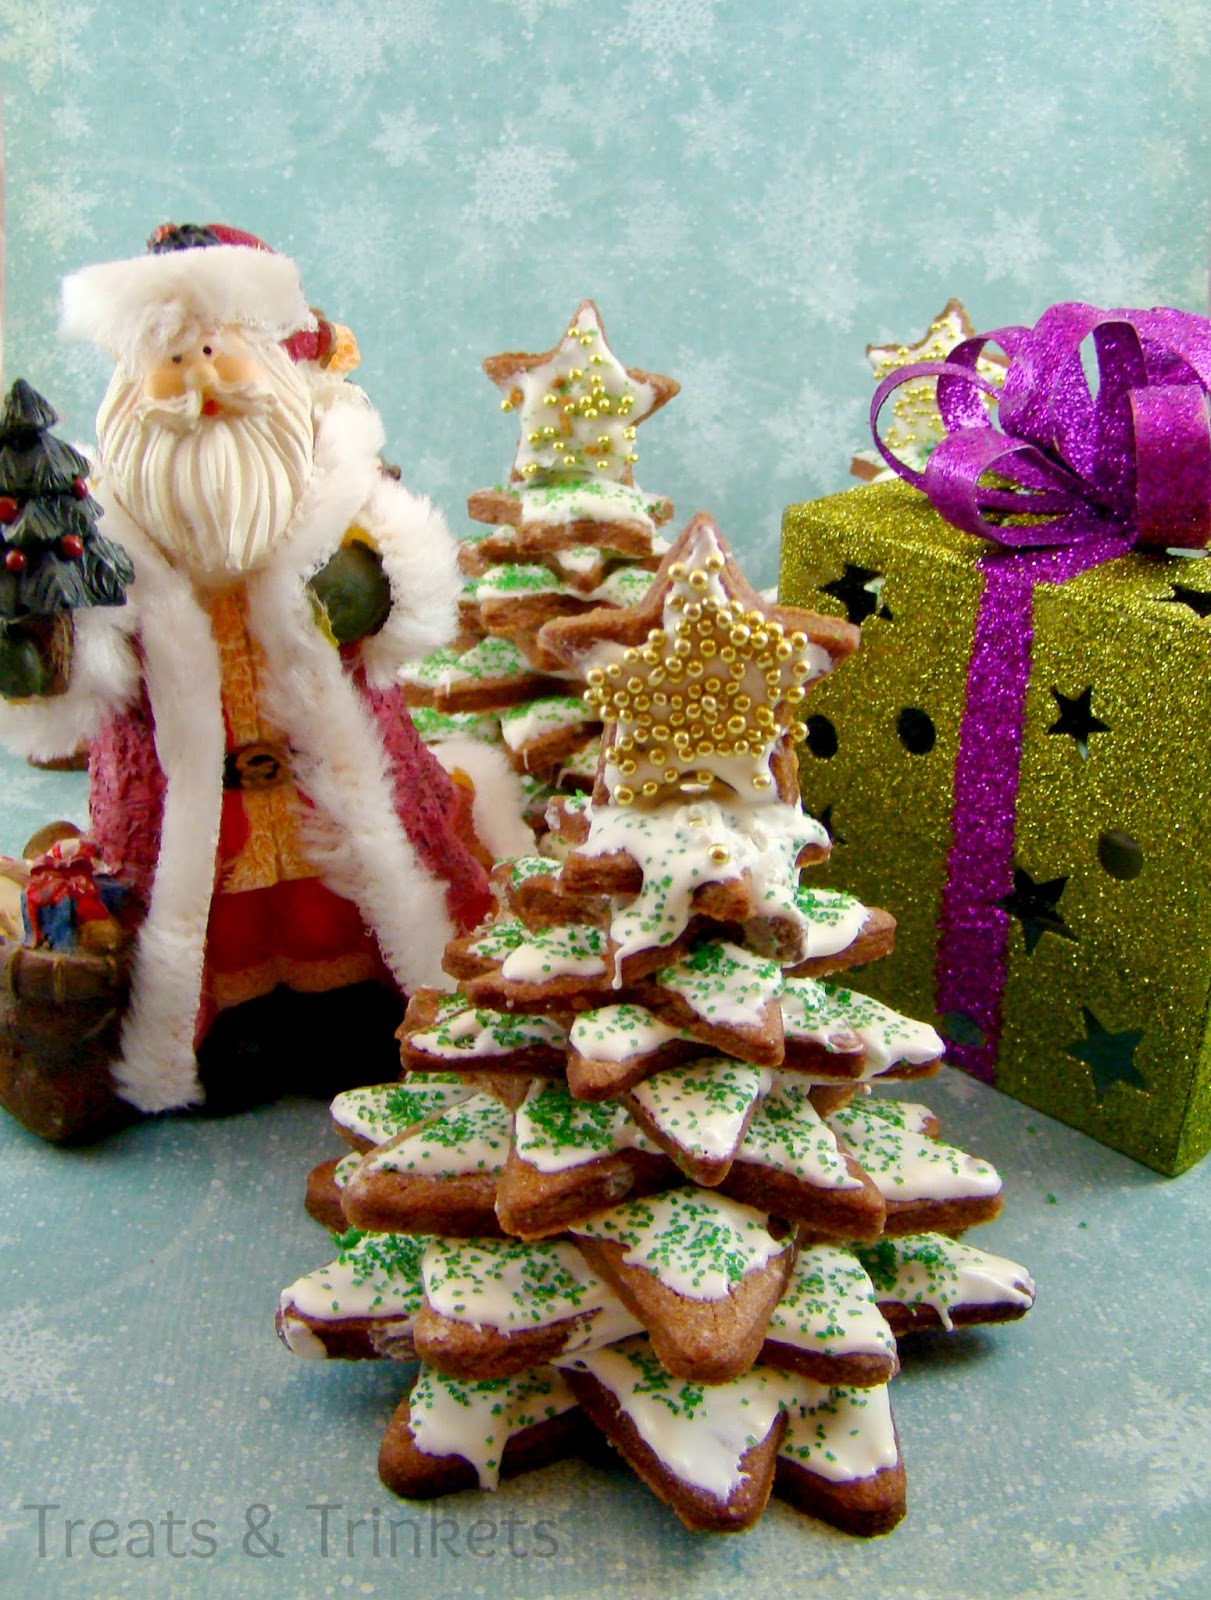 Treats & Trinkets: Christmas Tree Cookie Stacks & the Year in Review